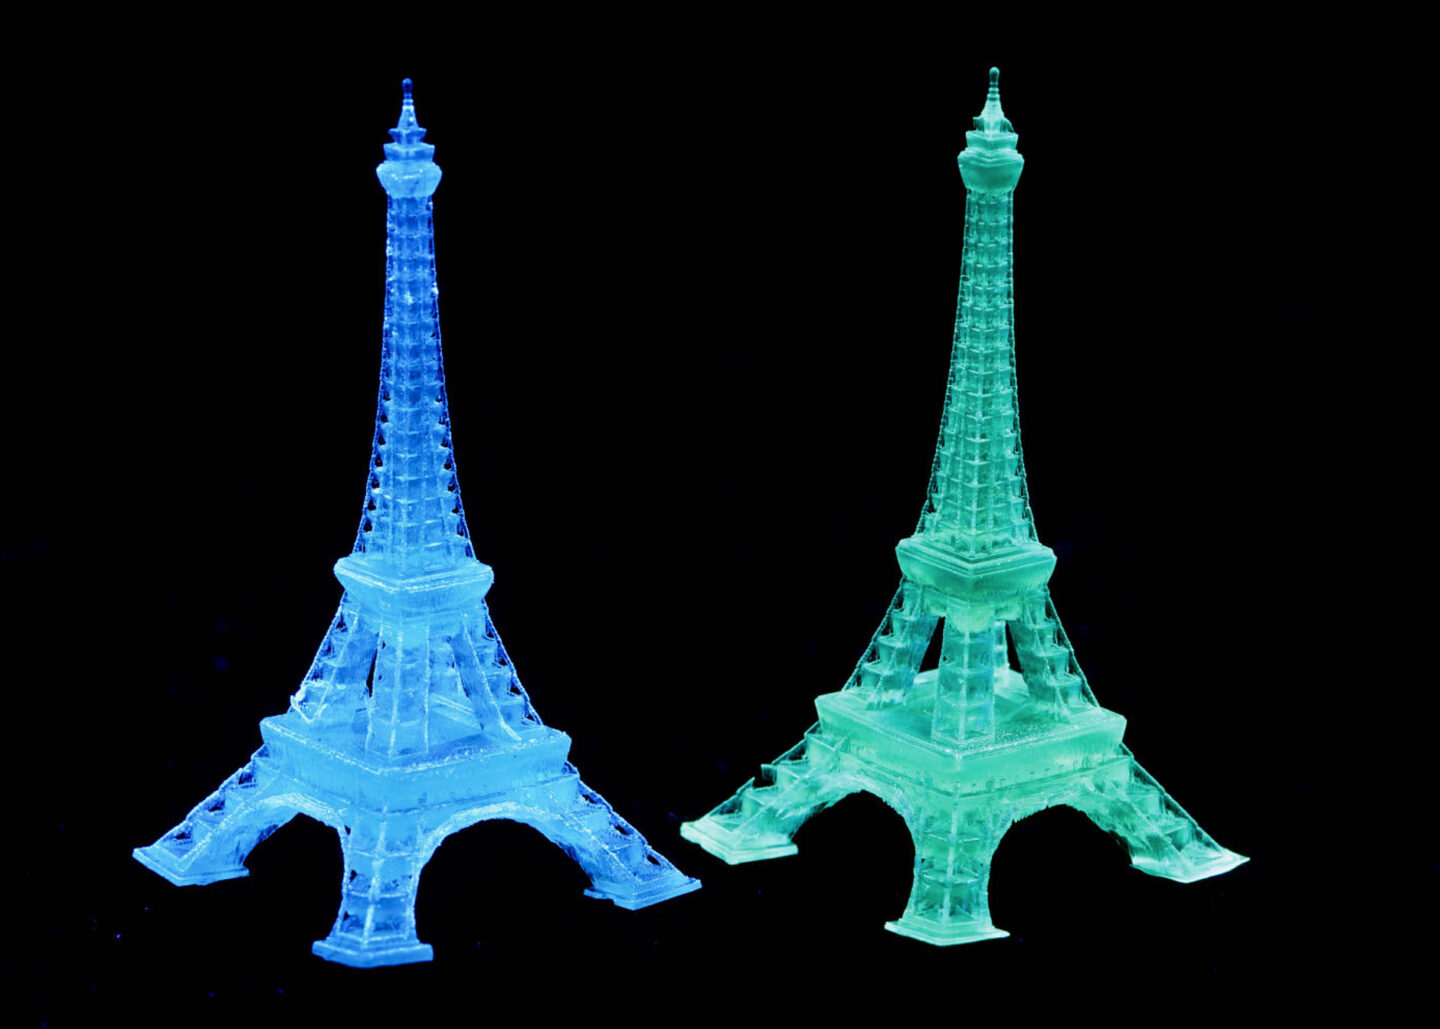  Eiffel Tower-shaped luminescent structures 3D-printed from supramolecular ink. Each 2-centimeter-tall device is fabricated from supramolecular ink that emits blue or green light when exposed to 254-nanometer ultraviolet light. (Credit: Peidong Yang and Cheng Zhu/Berkeley Lab. Courtesy of Science)